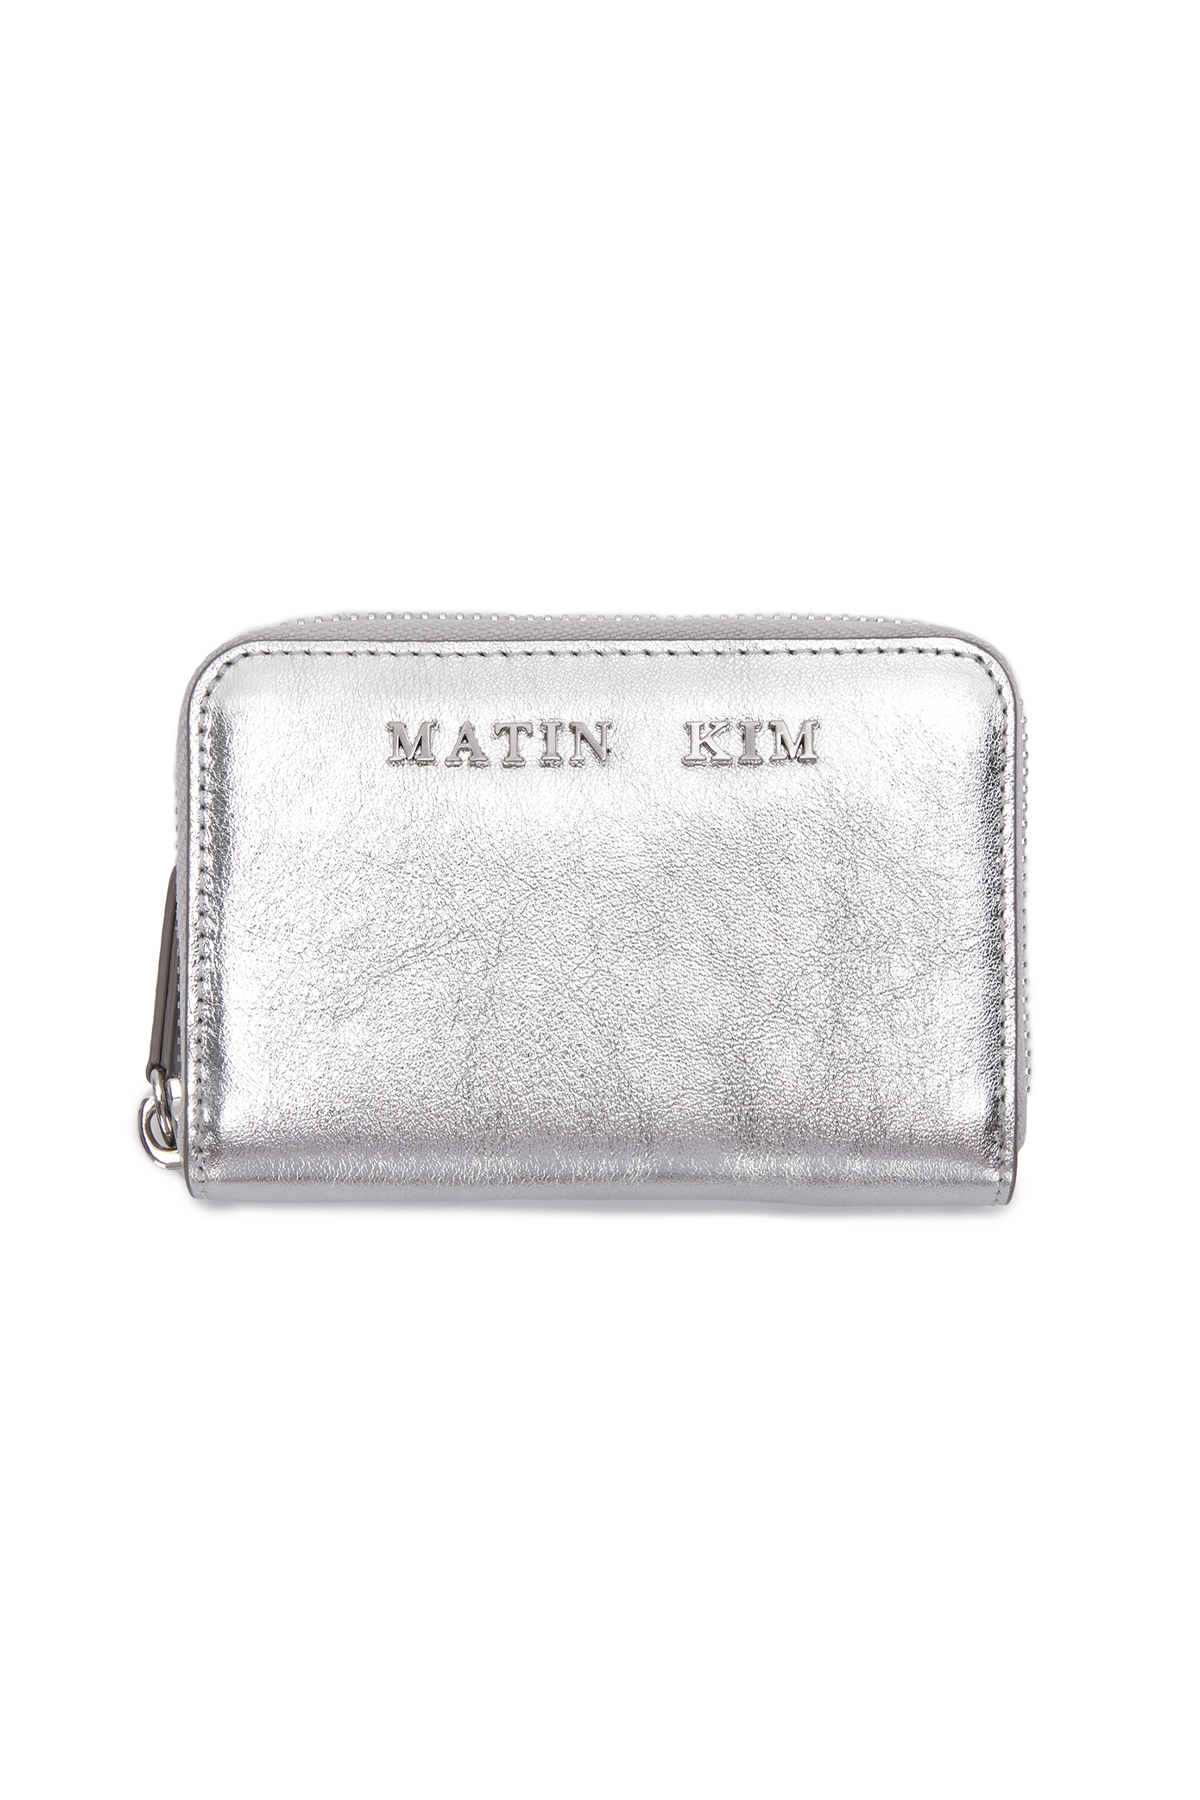 GLOSSY COMPACT WALLET IN SILVER